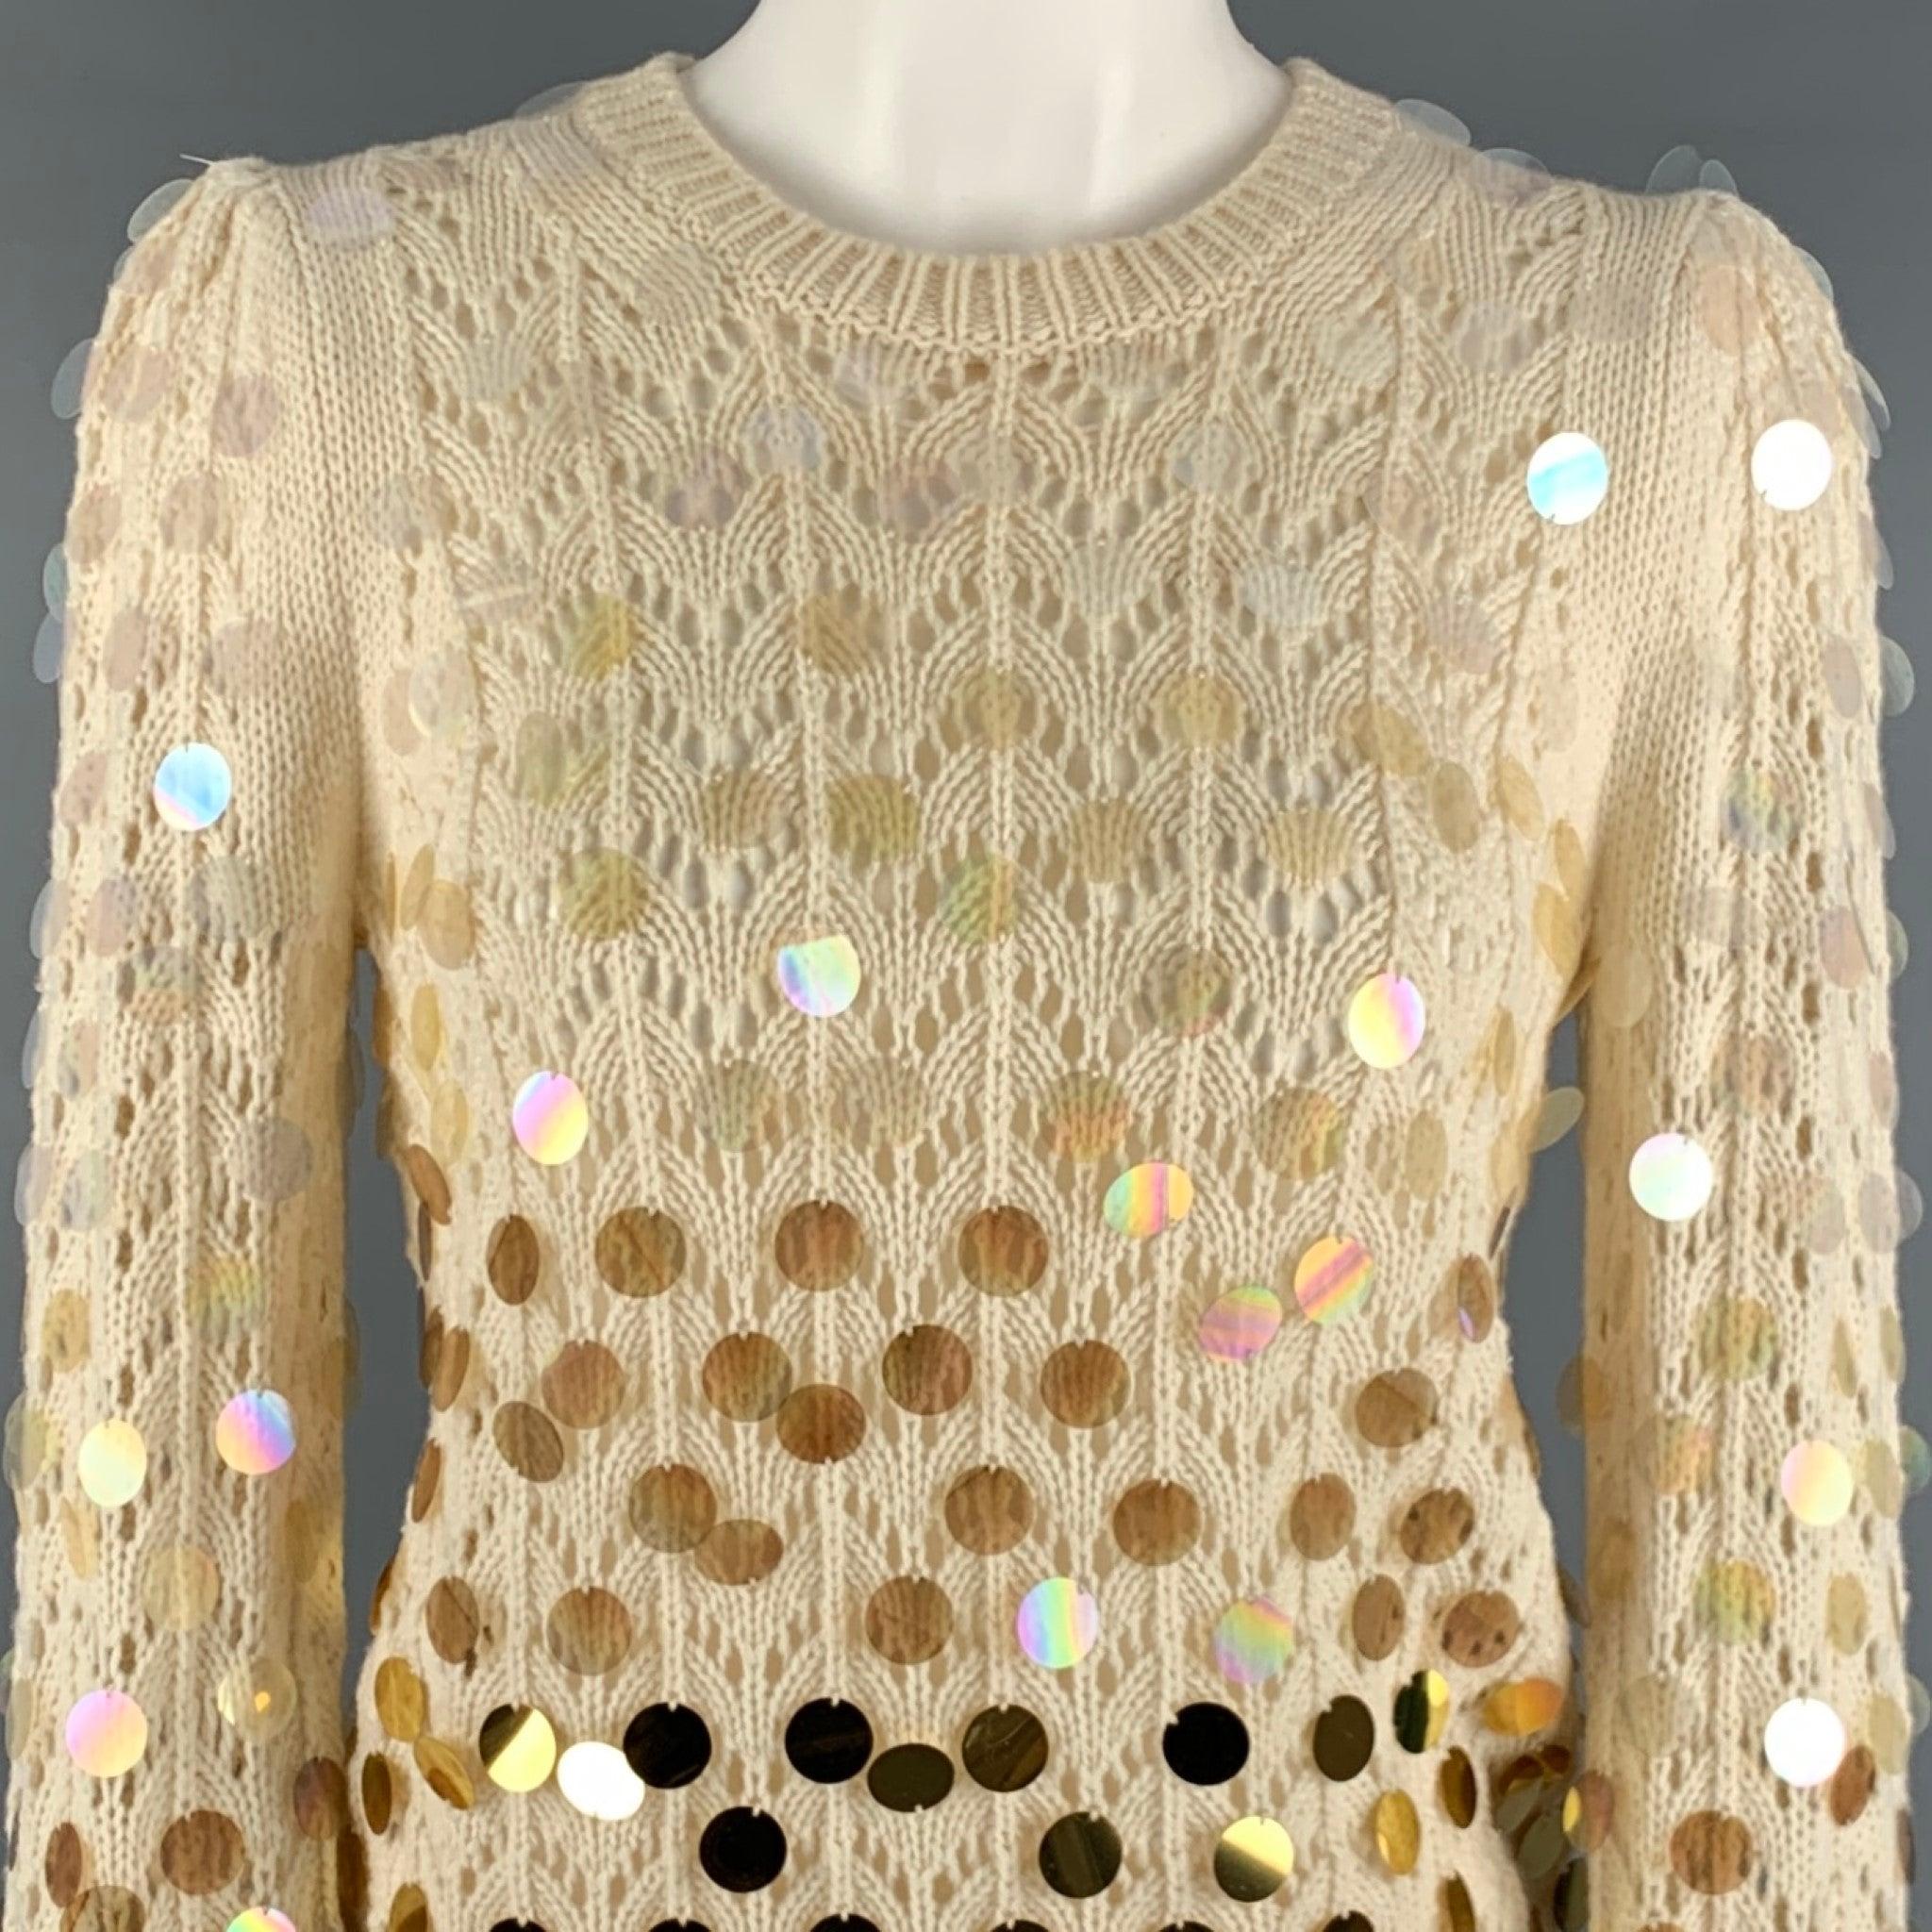 MARC JACOBS sweater
in a cream wool cashmere blend knit featuring payette sequins which ombre from clear to an opaque gold, lace-like see-through knit technique, raised shoulders, and a crew neck.Very Good Pre-Owned Condition. Minor signs of wear on